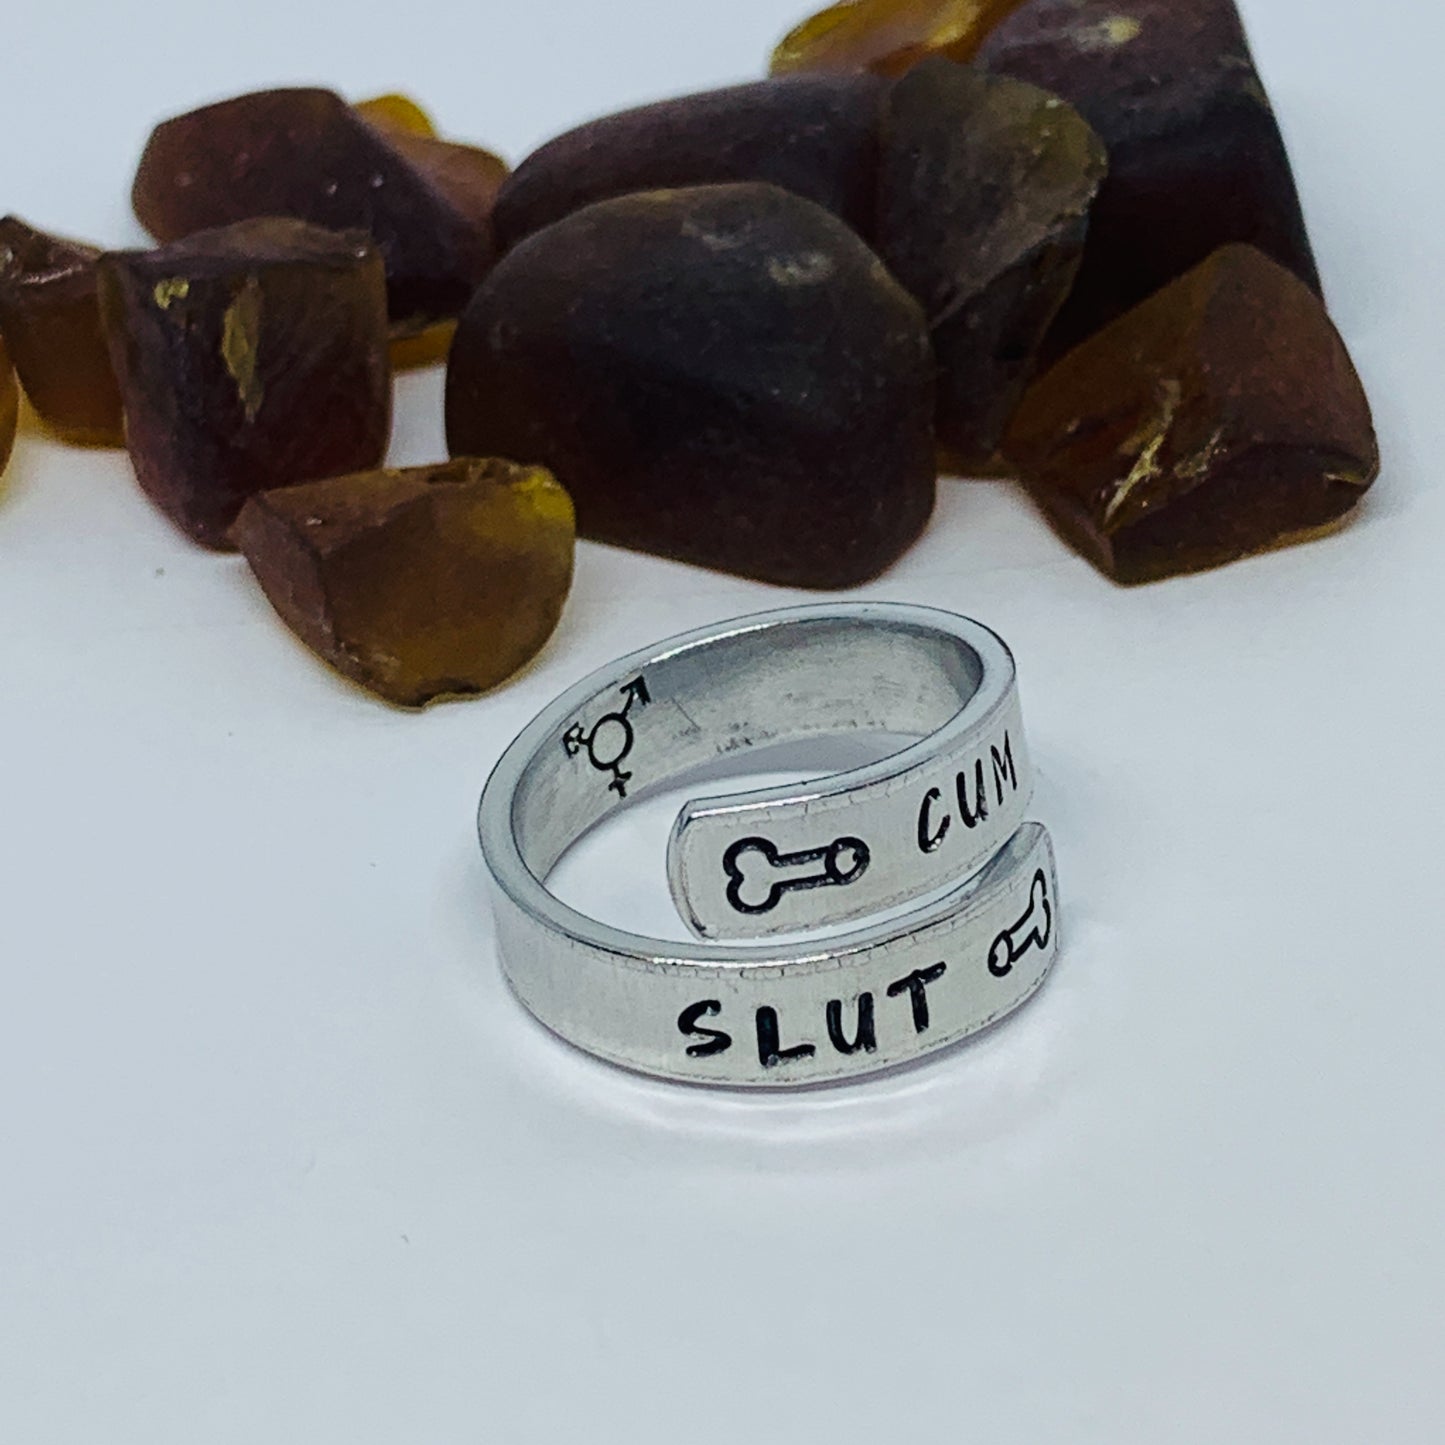 Adult-Themed Hand Stamped Metal Wrap Ring | Cum Slut | Penis Design Ring | Adjustable Sexy Adult Ring | Transgender Ring | They Them